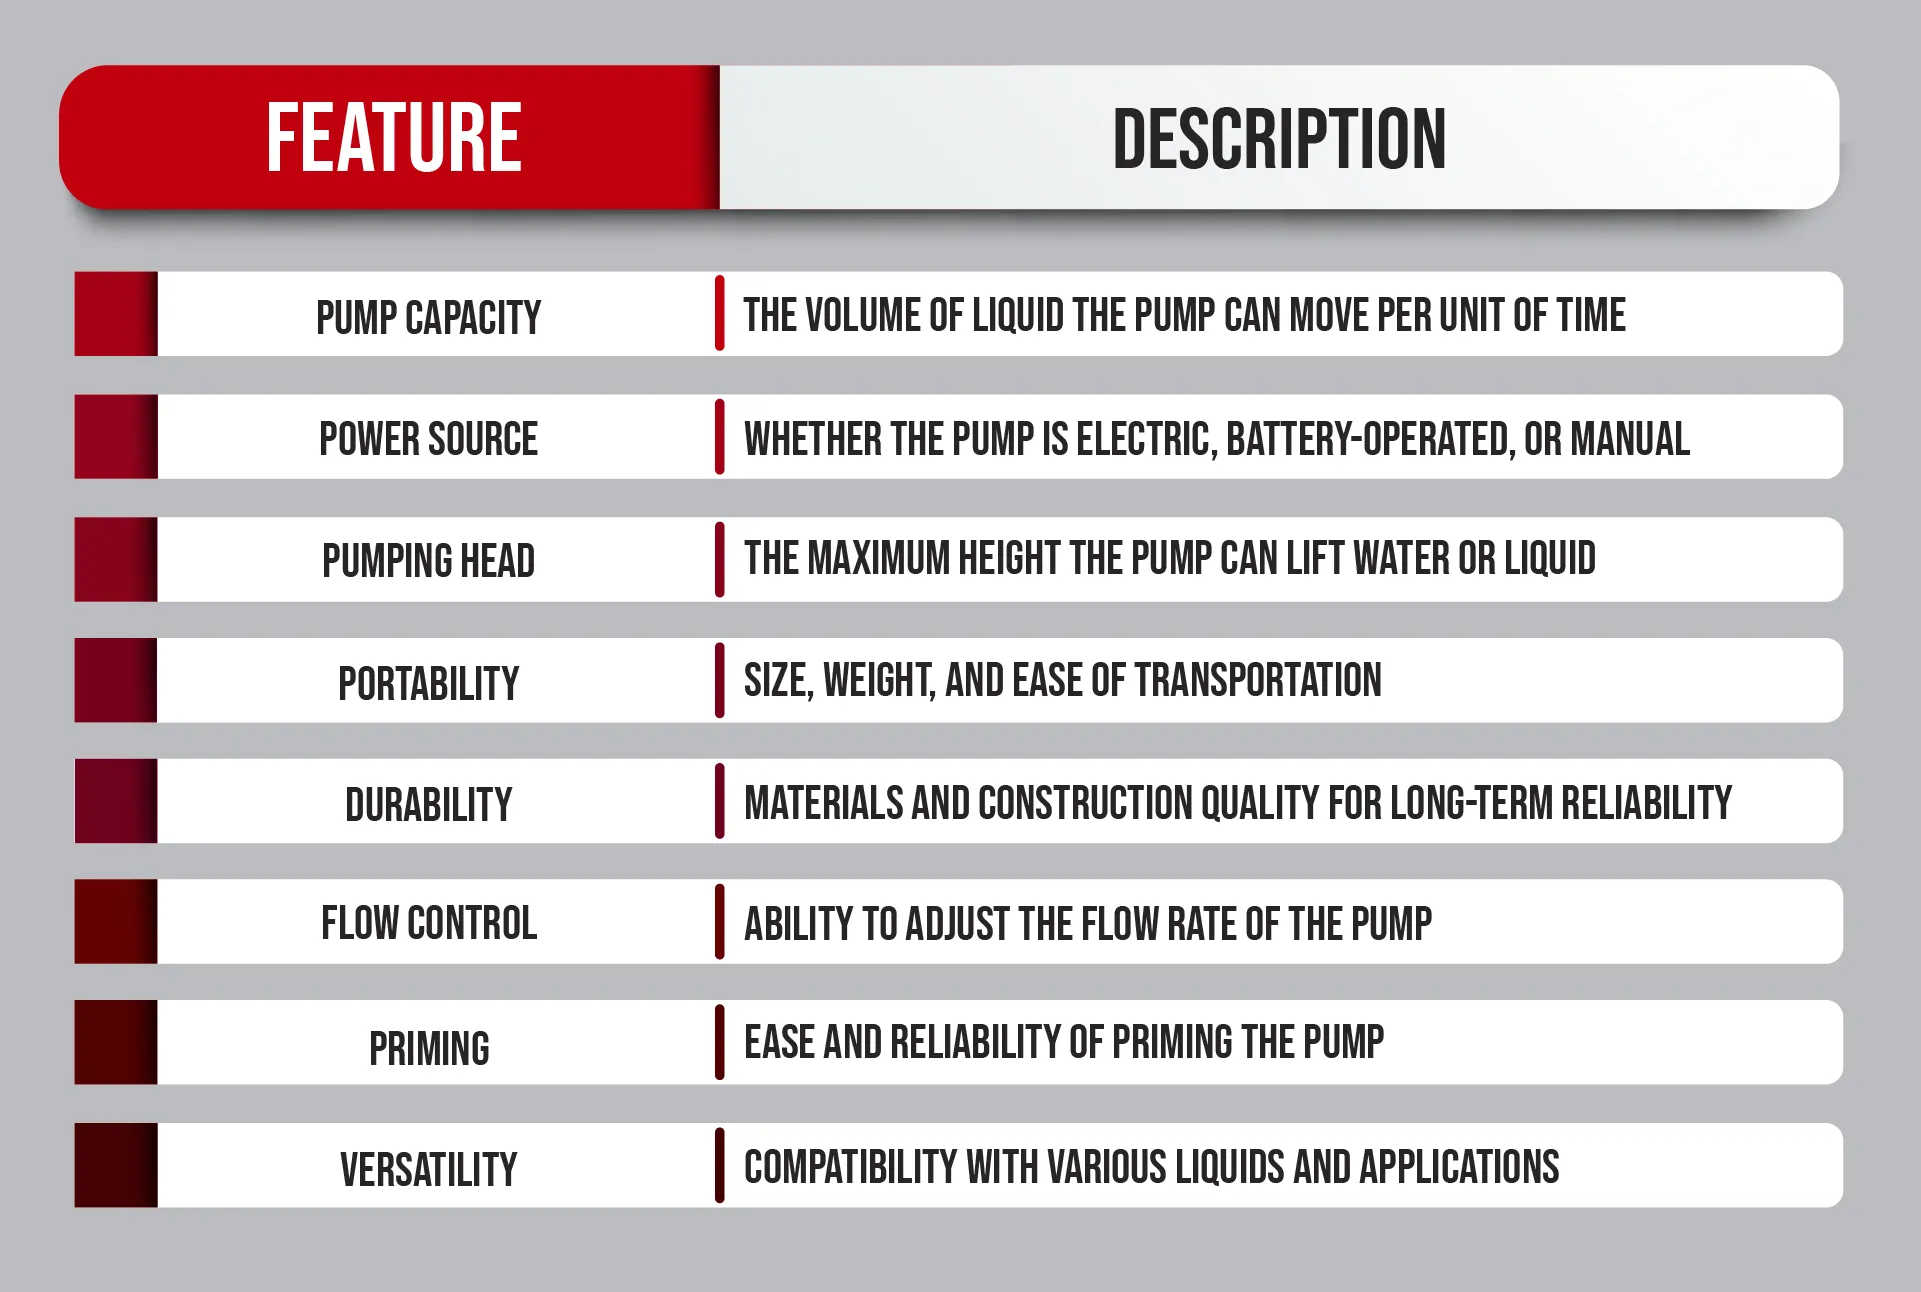 Infographic about the different features of a utility pump